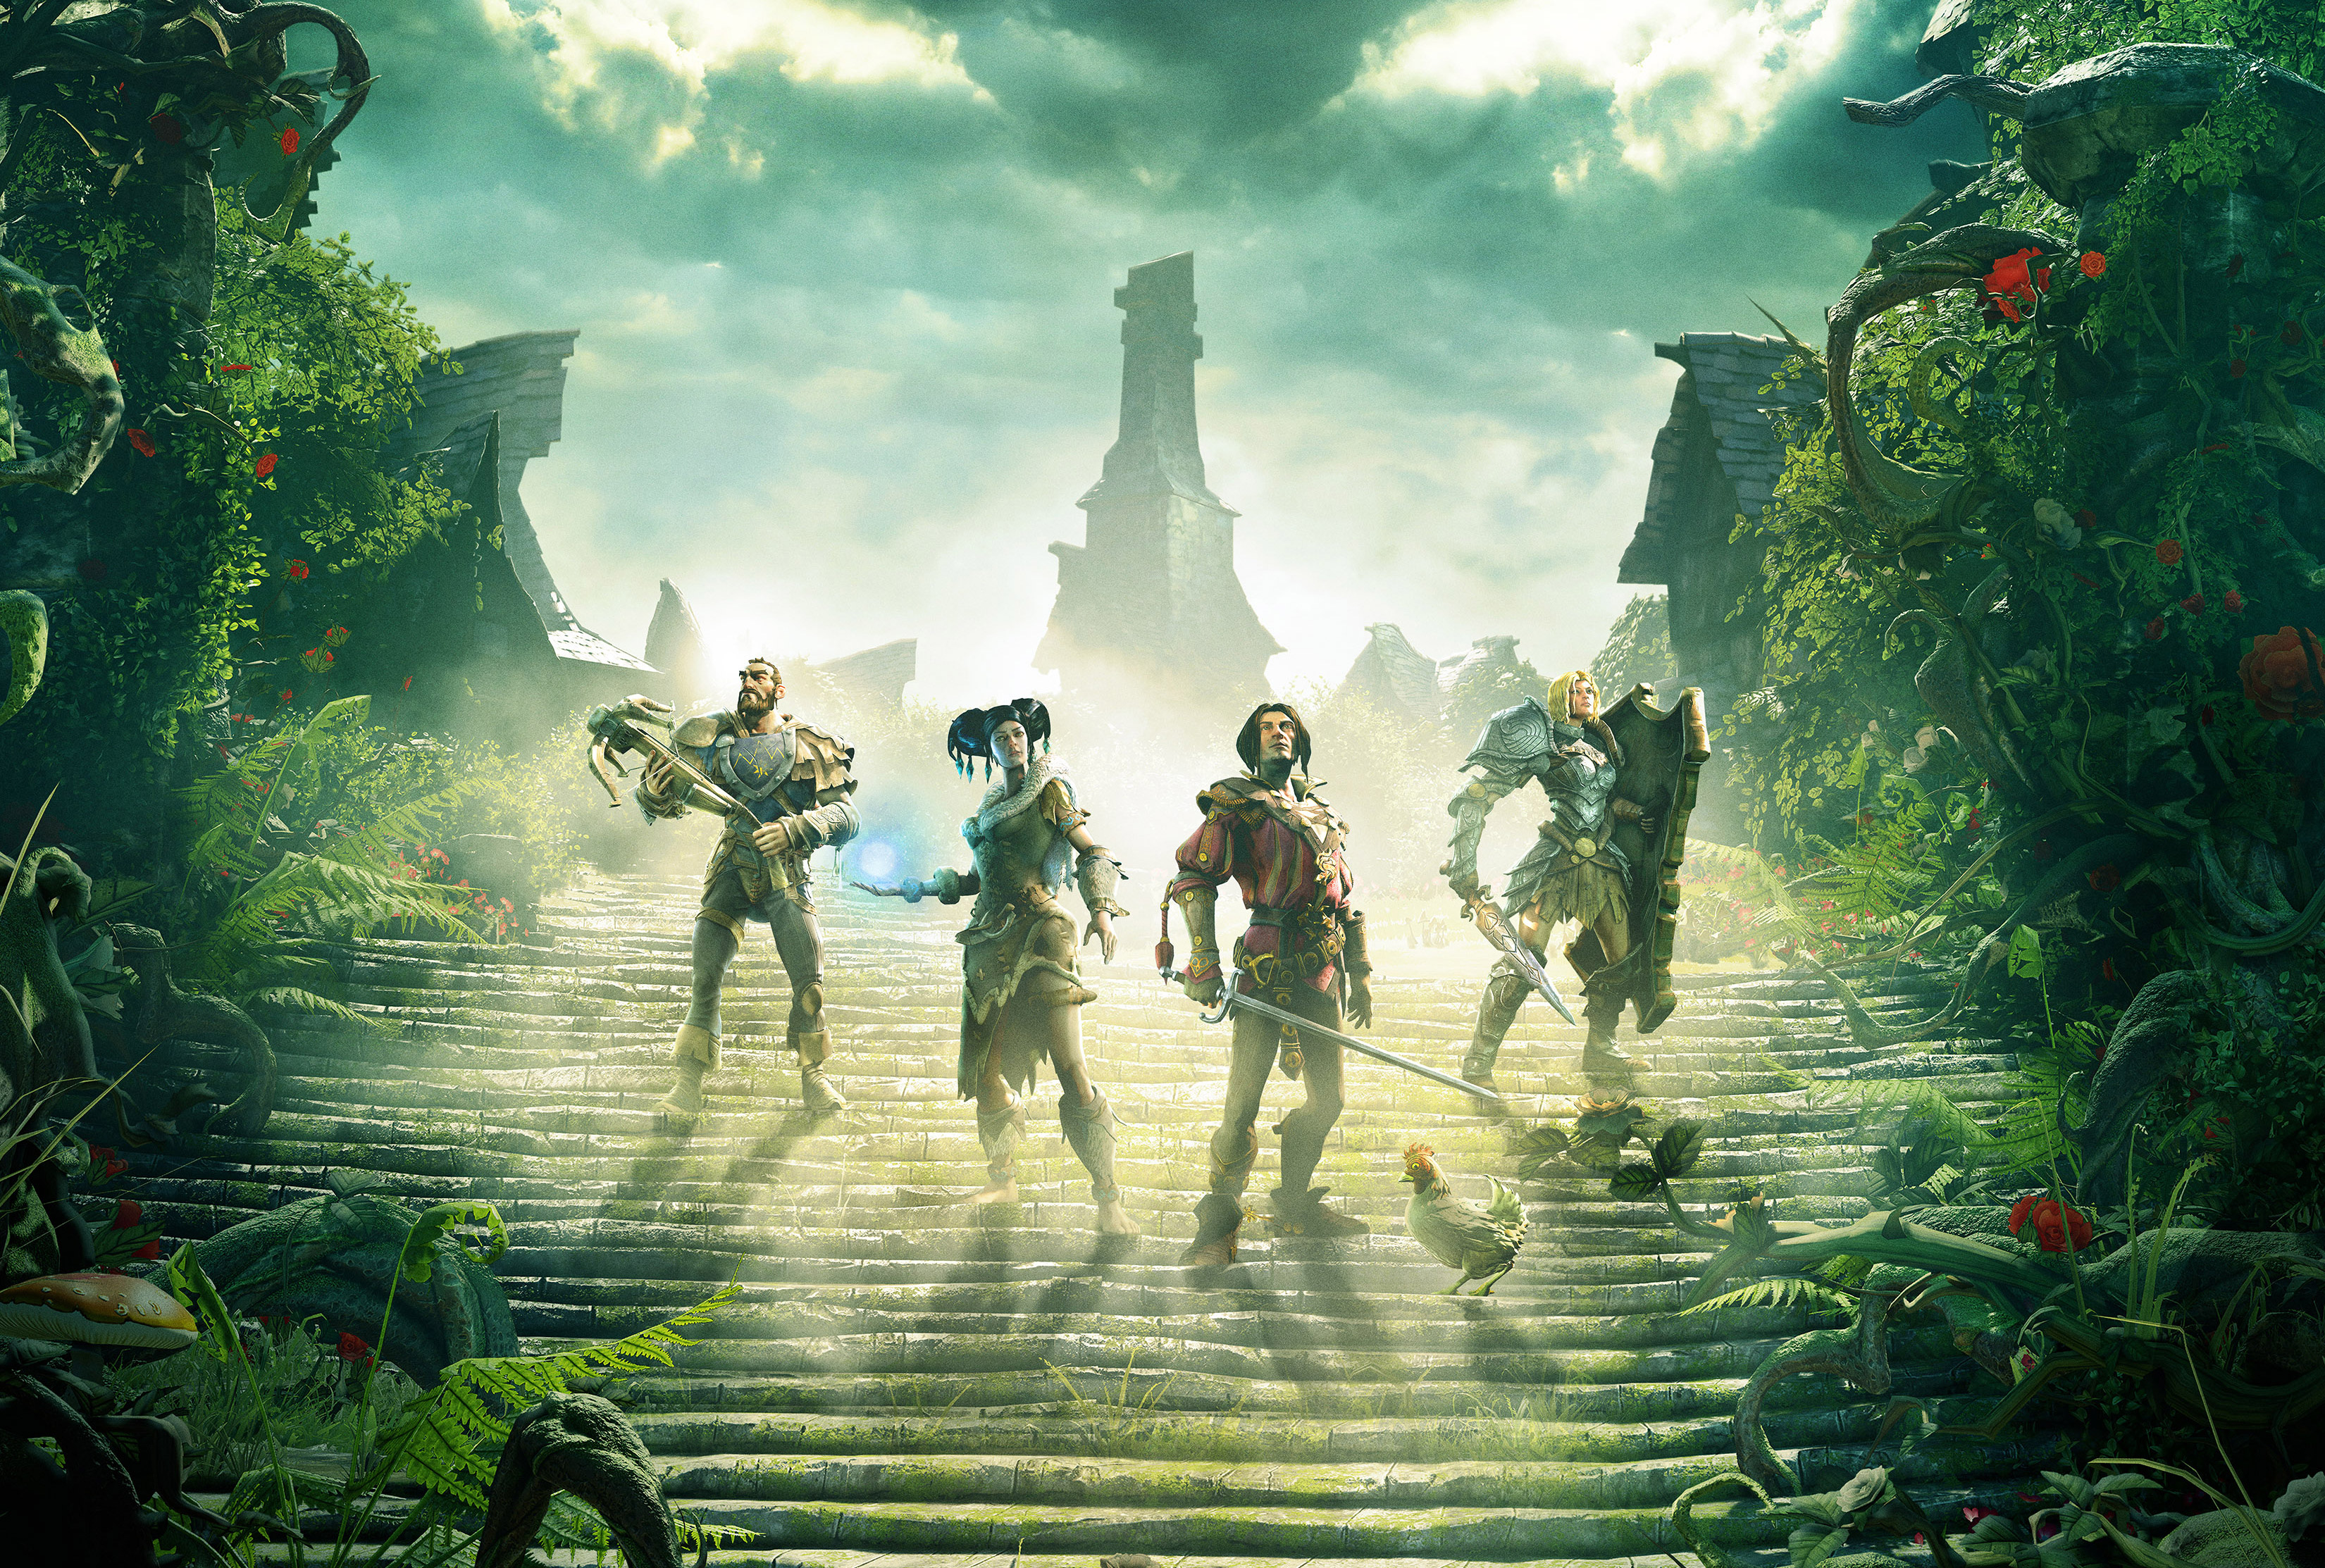 Game posters. Fable Legends. Fable 4. Игра Fable 4. Игровые обои.